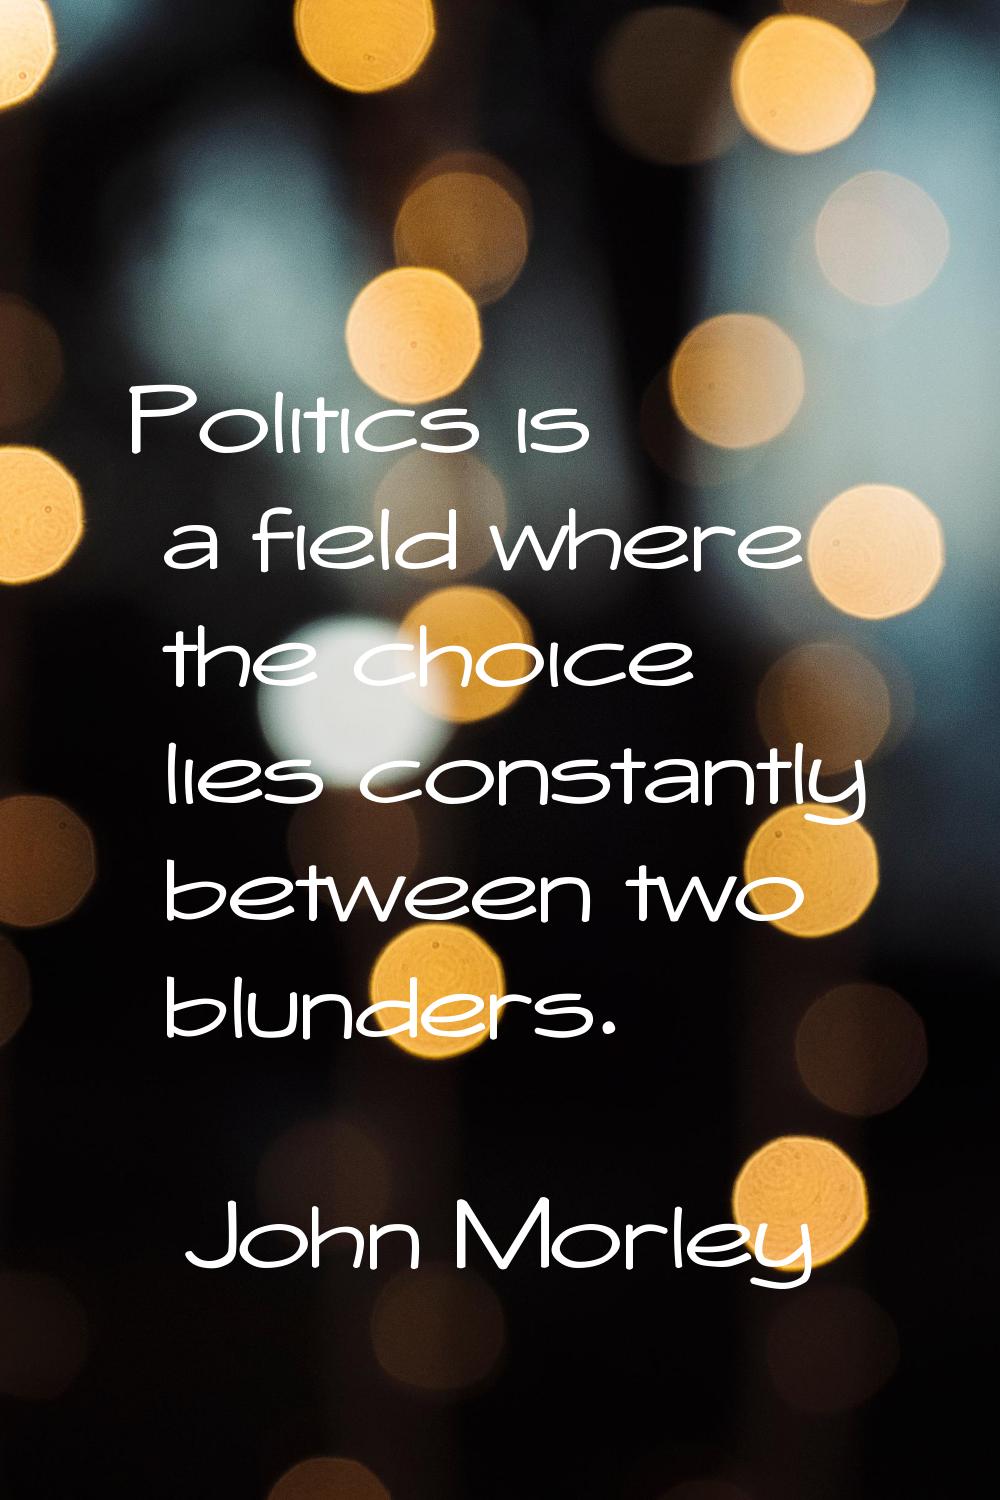 Politics is a field where the choice lies constantly between two blunders.